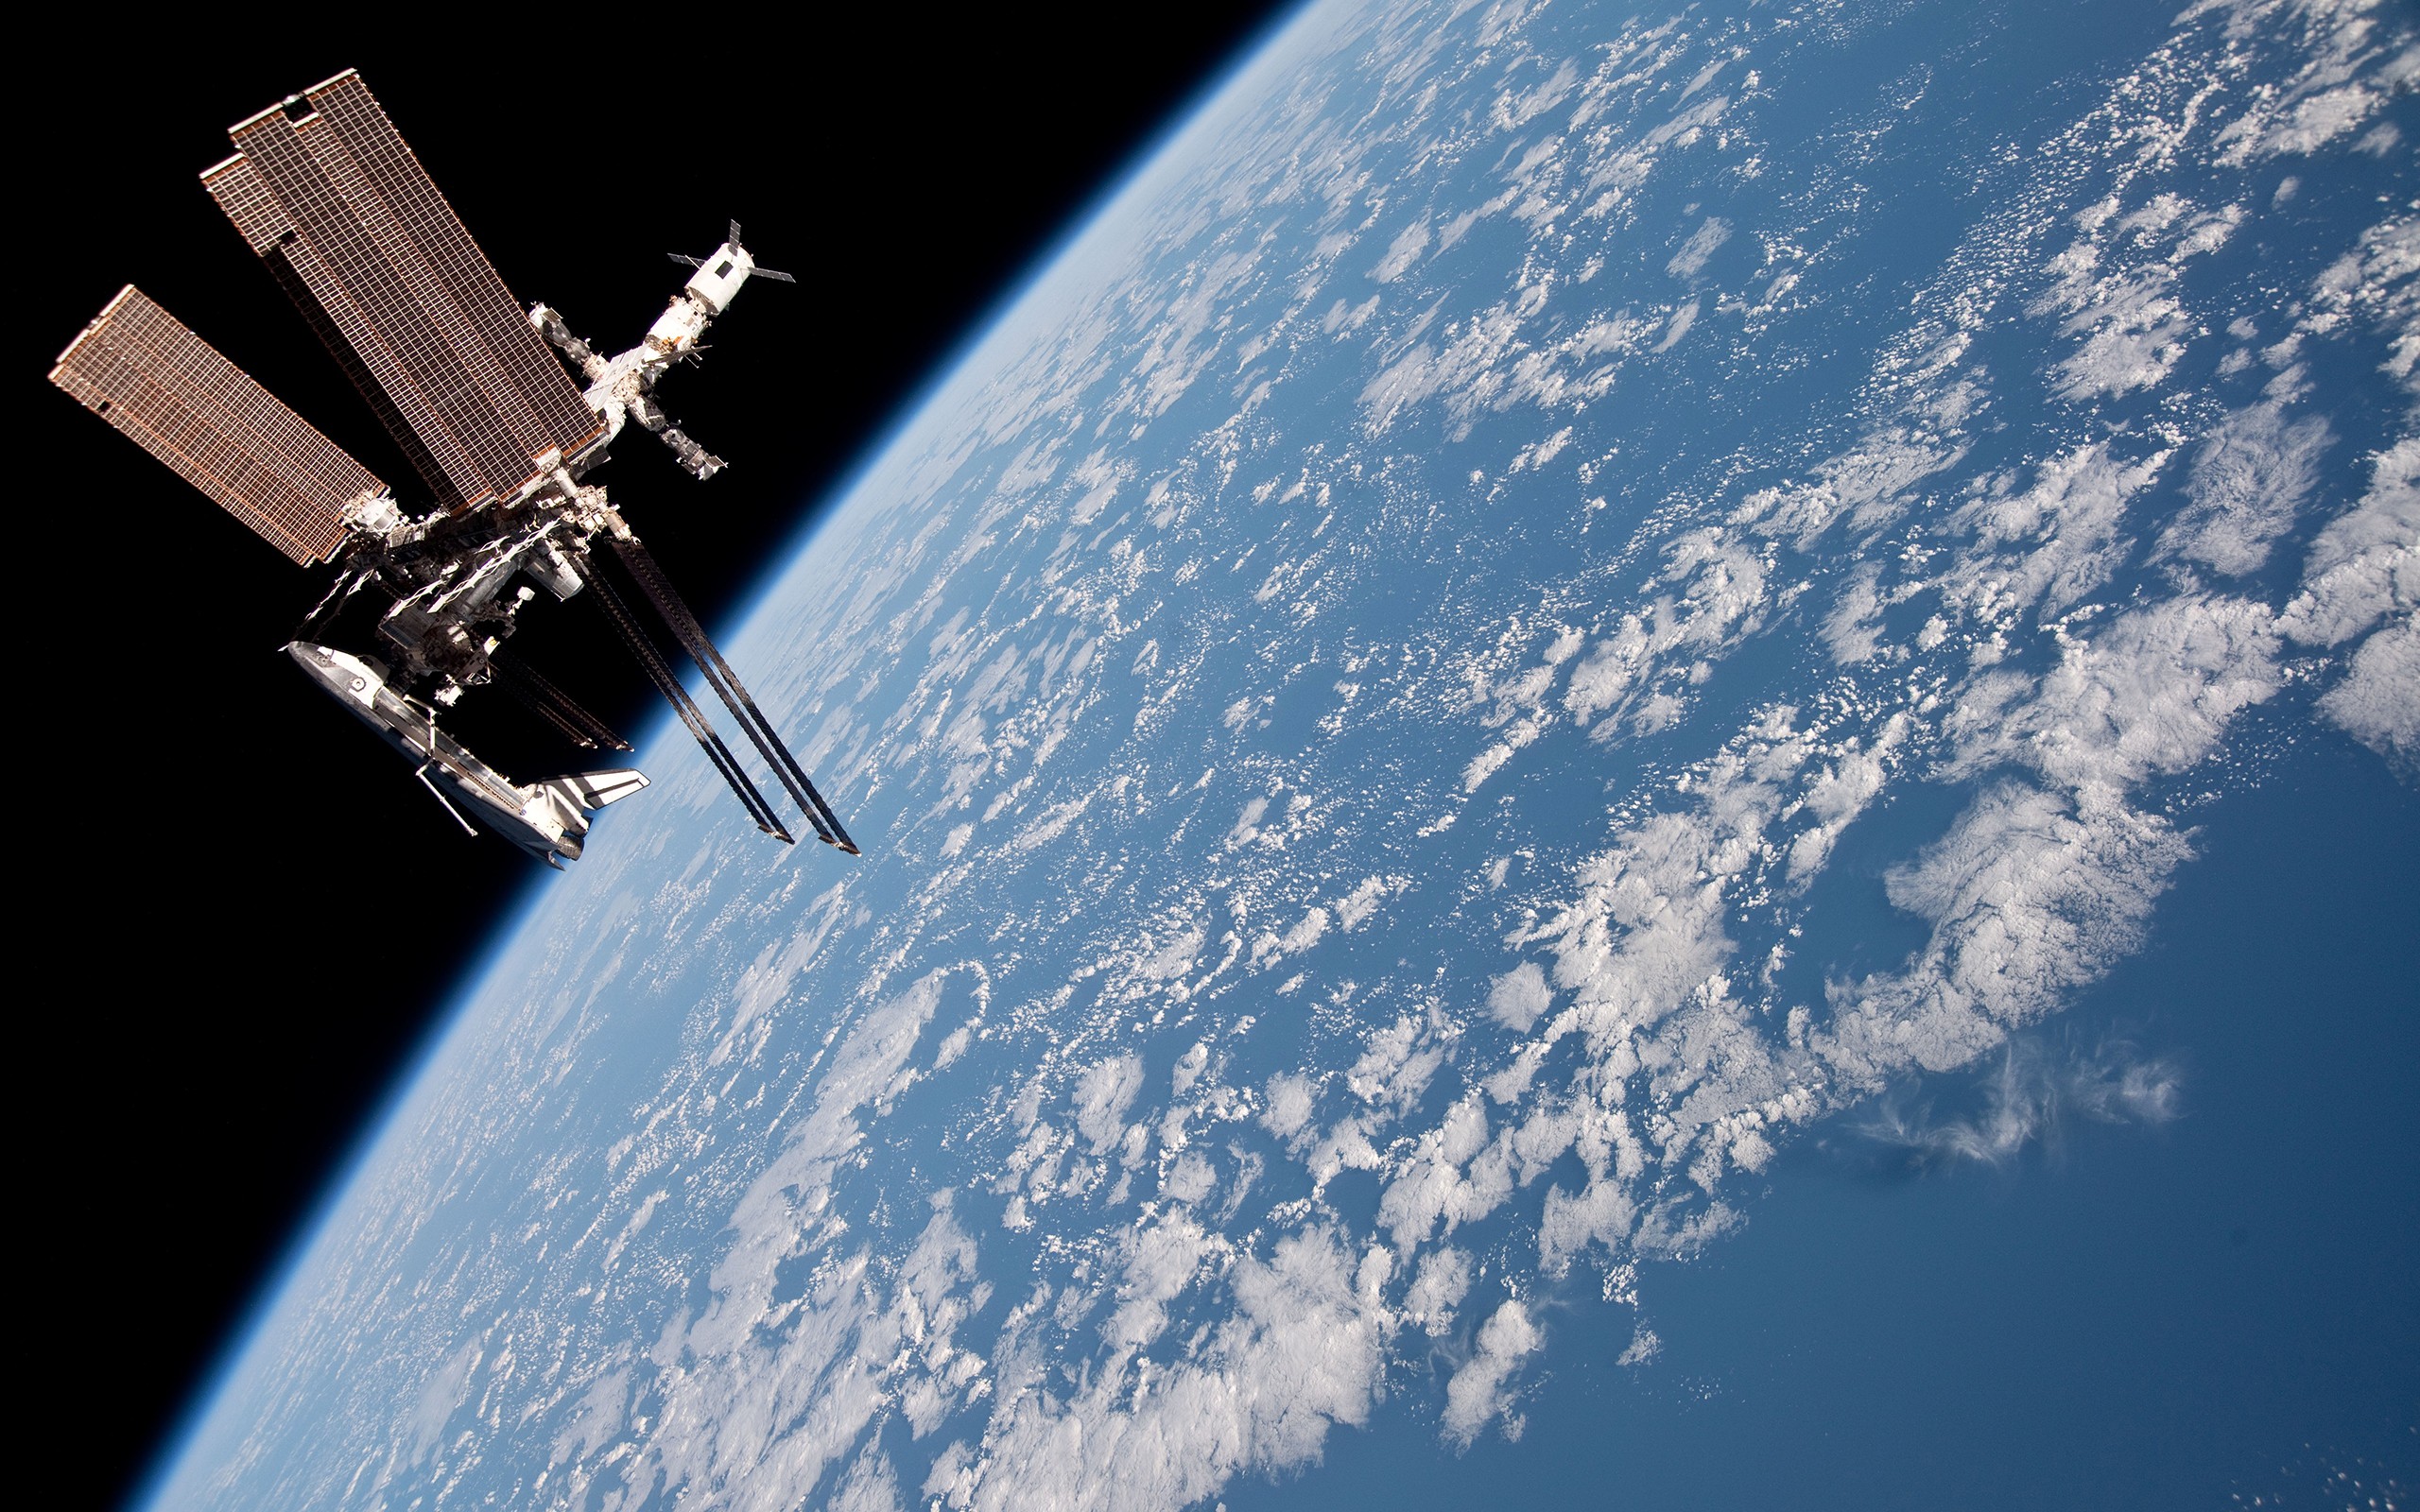 General 2560x1600 International Space Station space shuttle Endeavour space NASA Earth planet